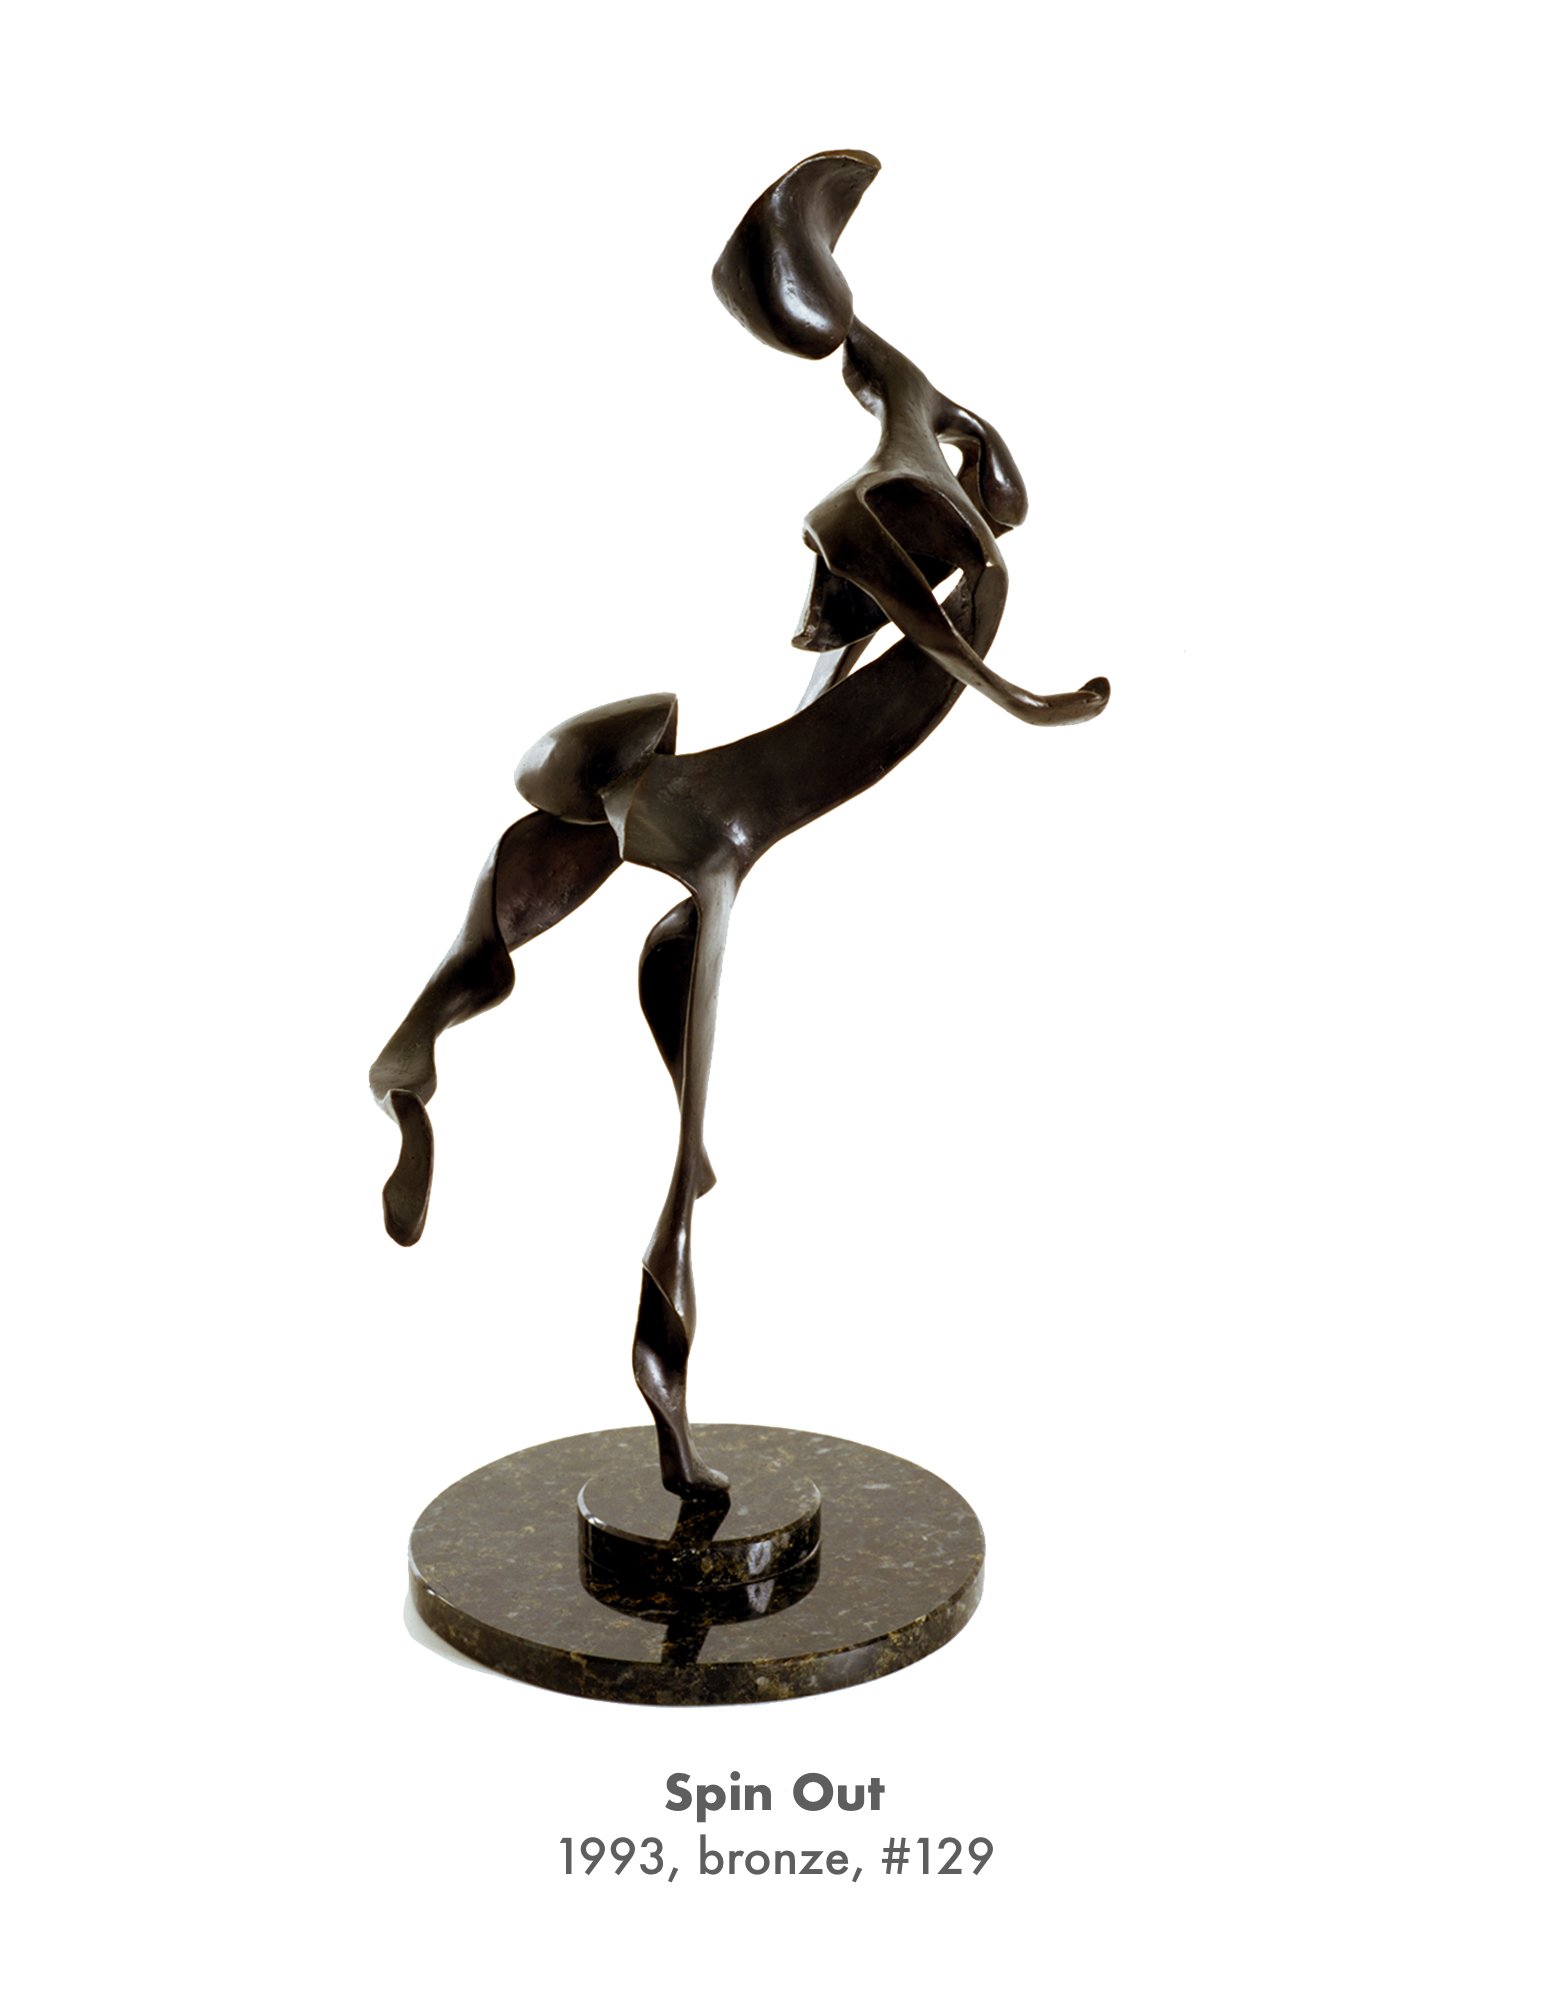 Spin Out, 1993, bronze, #129